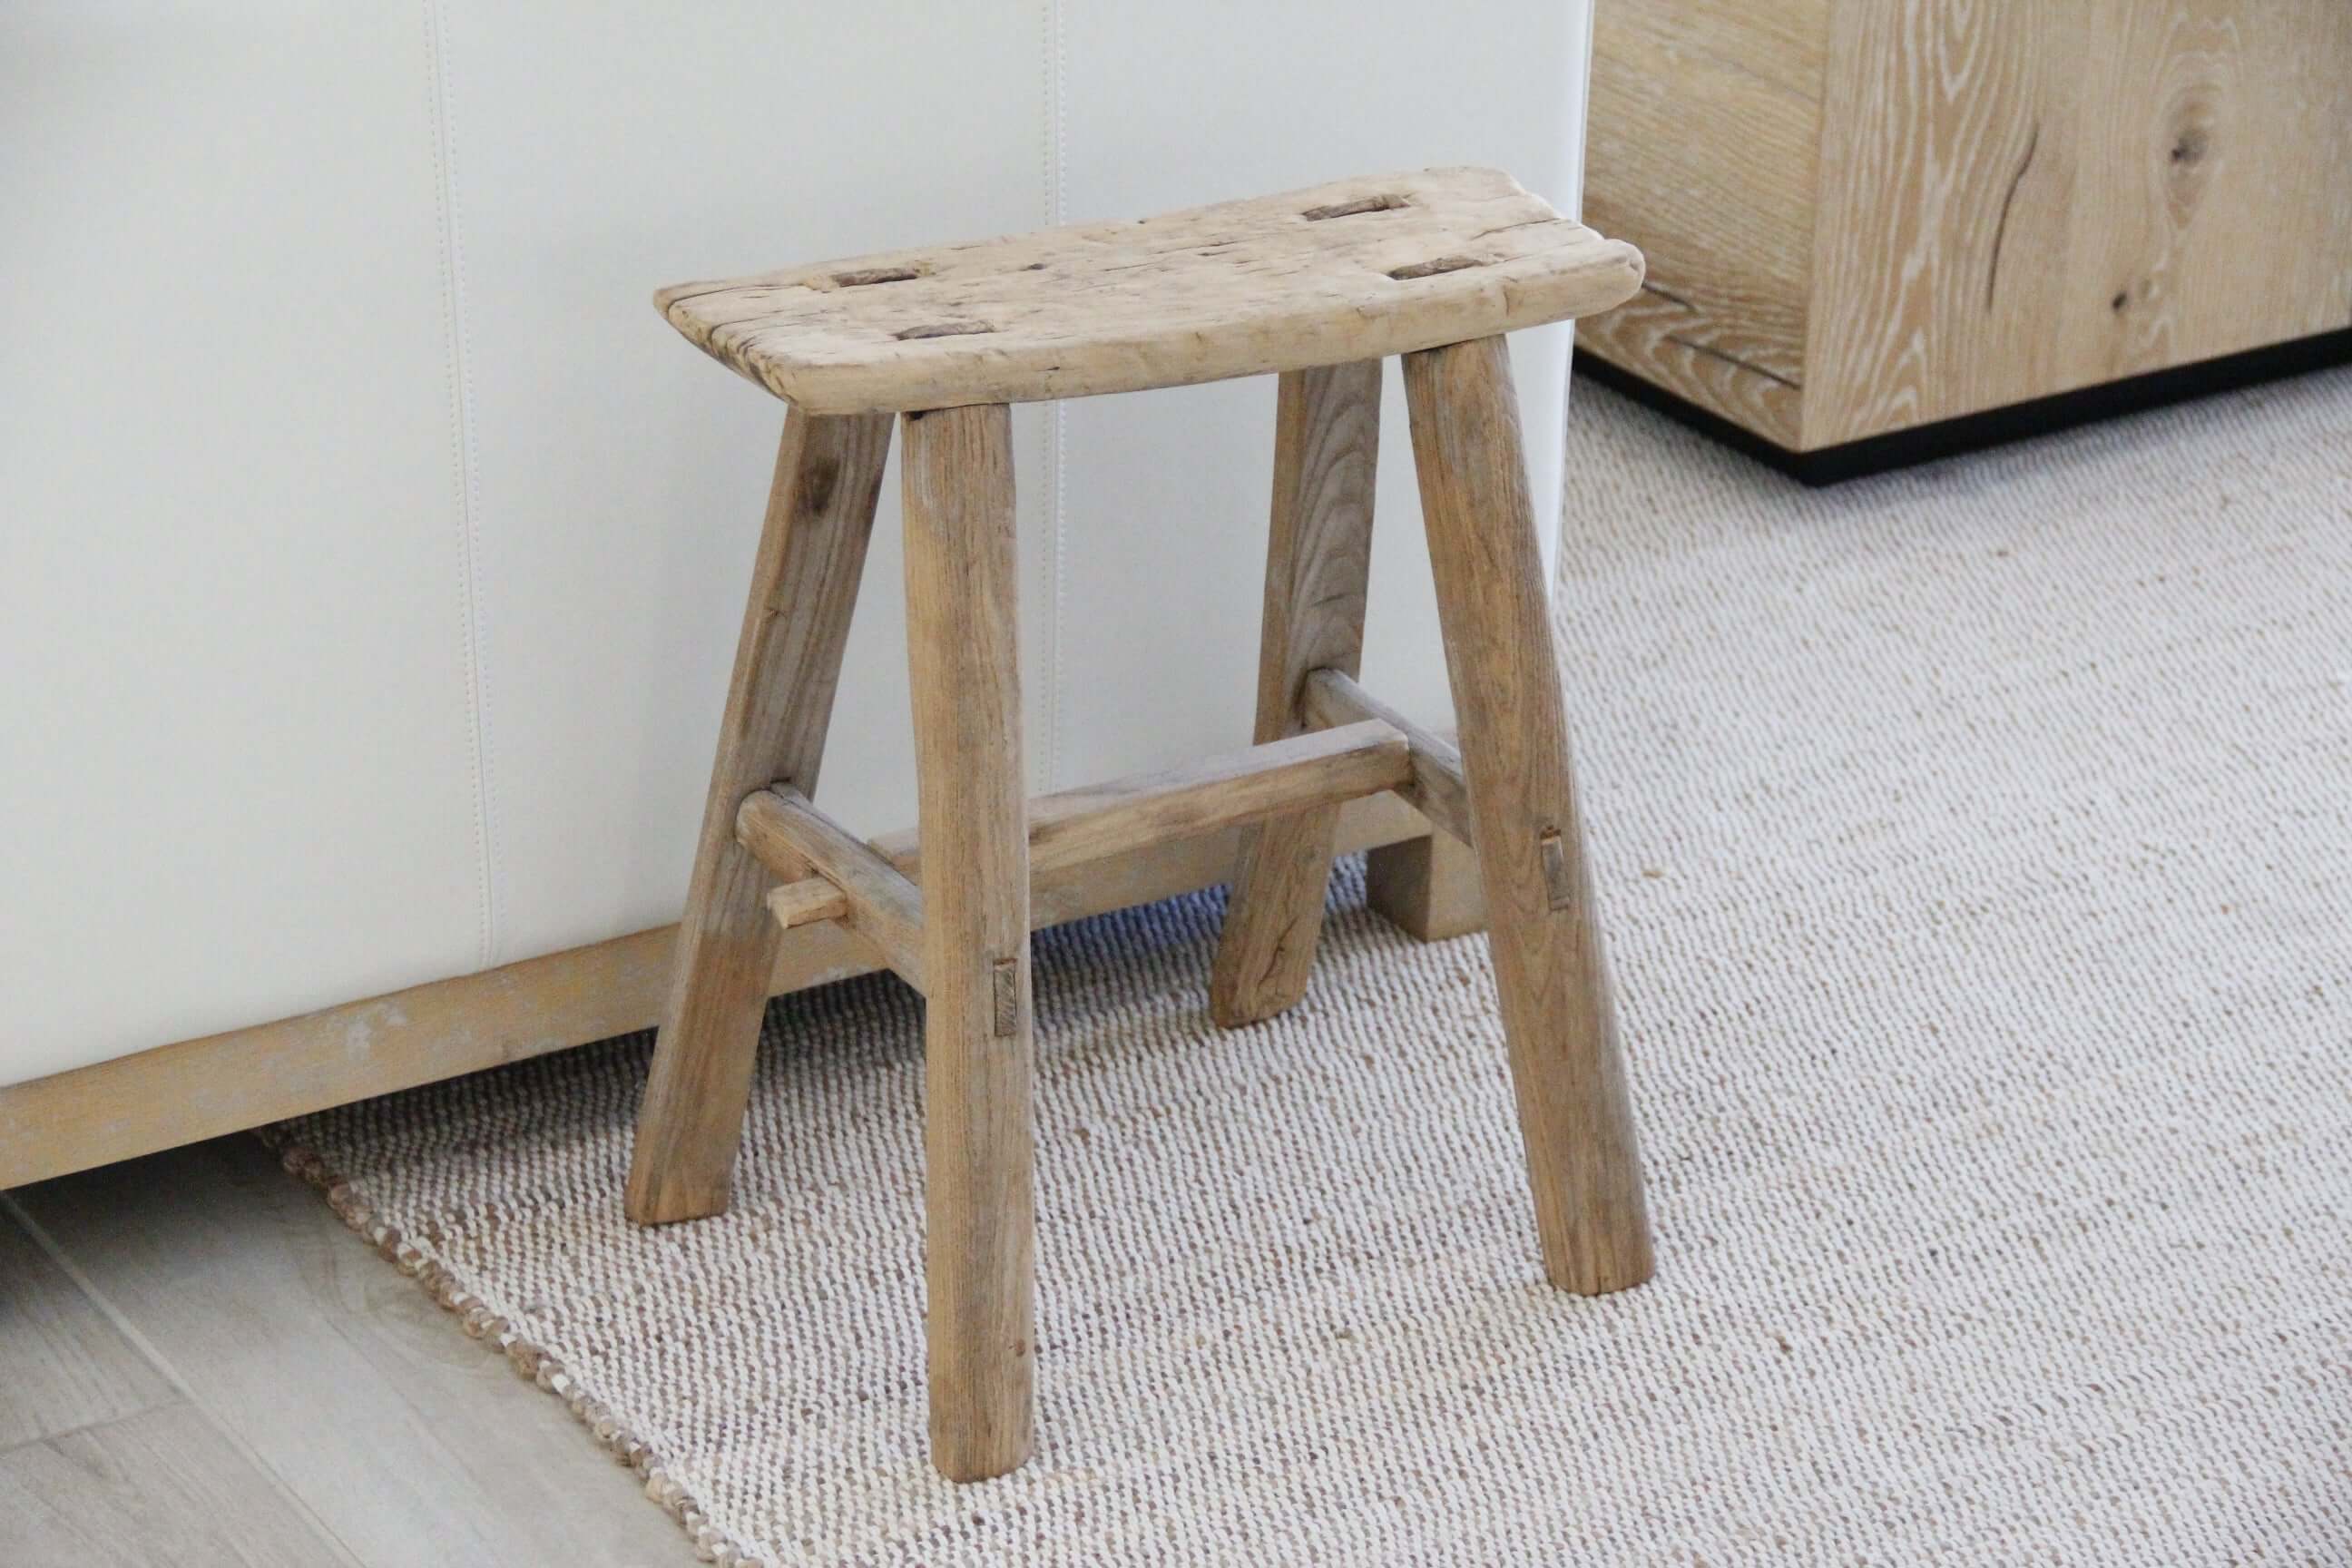 Benches and Stools: A Curated Selection of Vintage and Antique Elm Stools and Benches For Your Home - Debra Hall Lifestyle